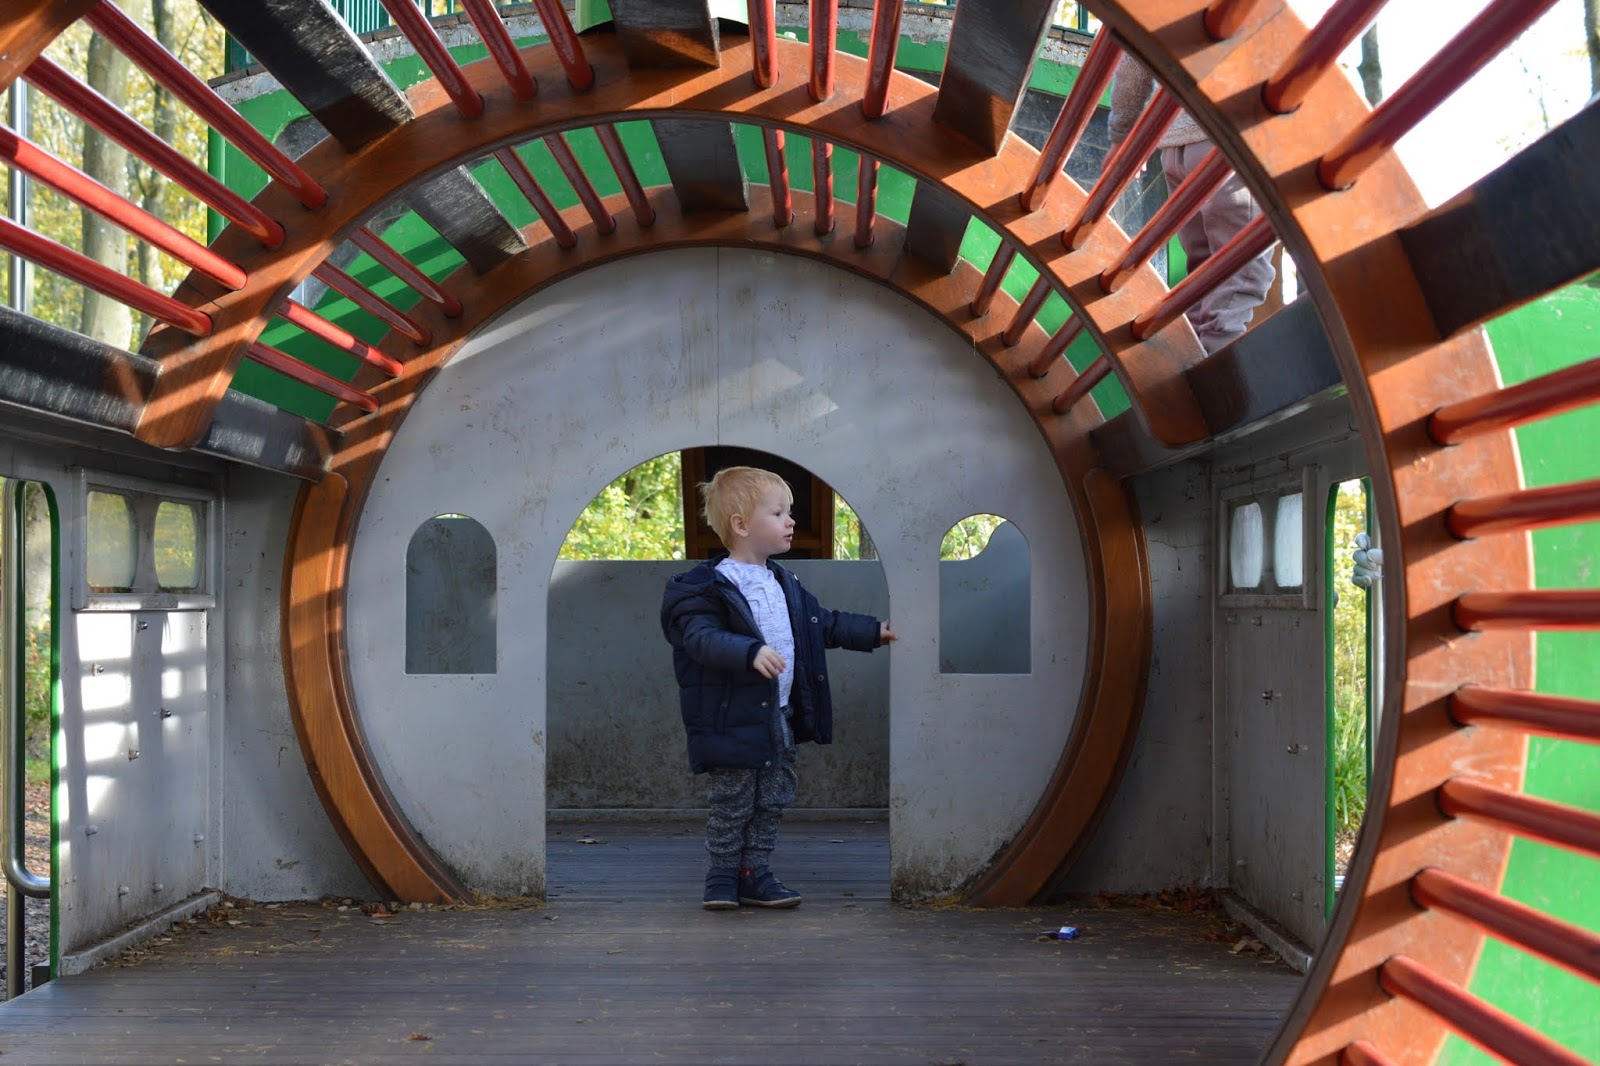 Visiting the Adventure Playground & Outdoor Play Areas at Wallington Hall  - inside train